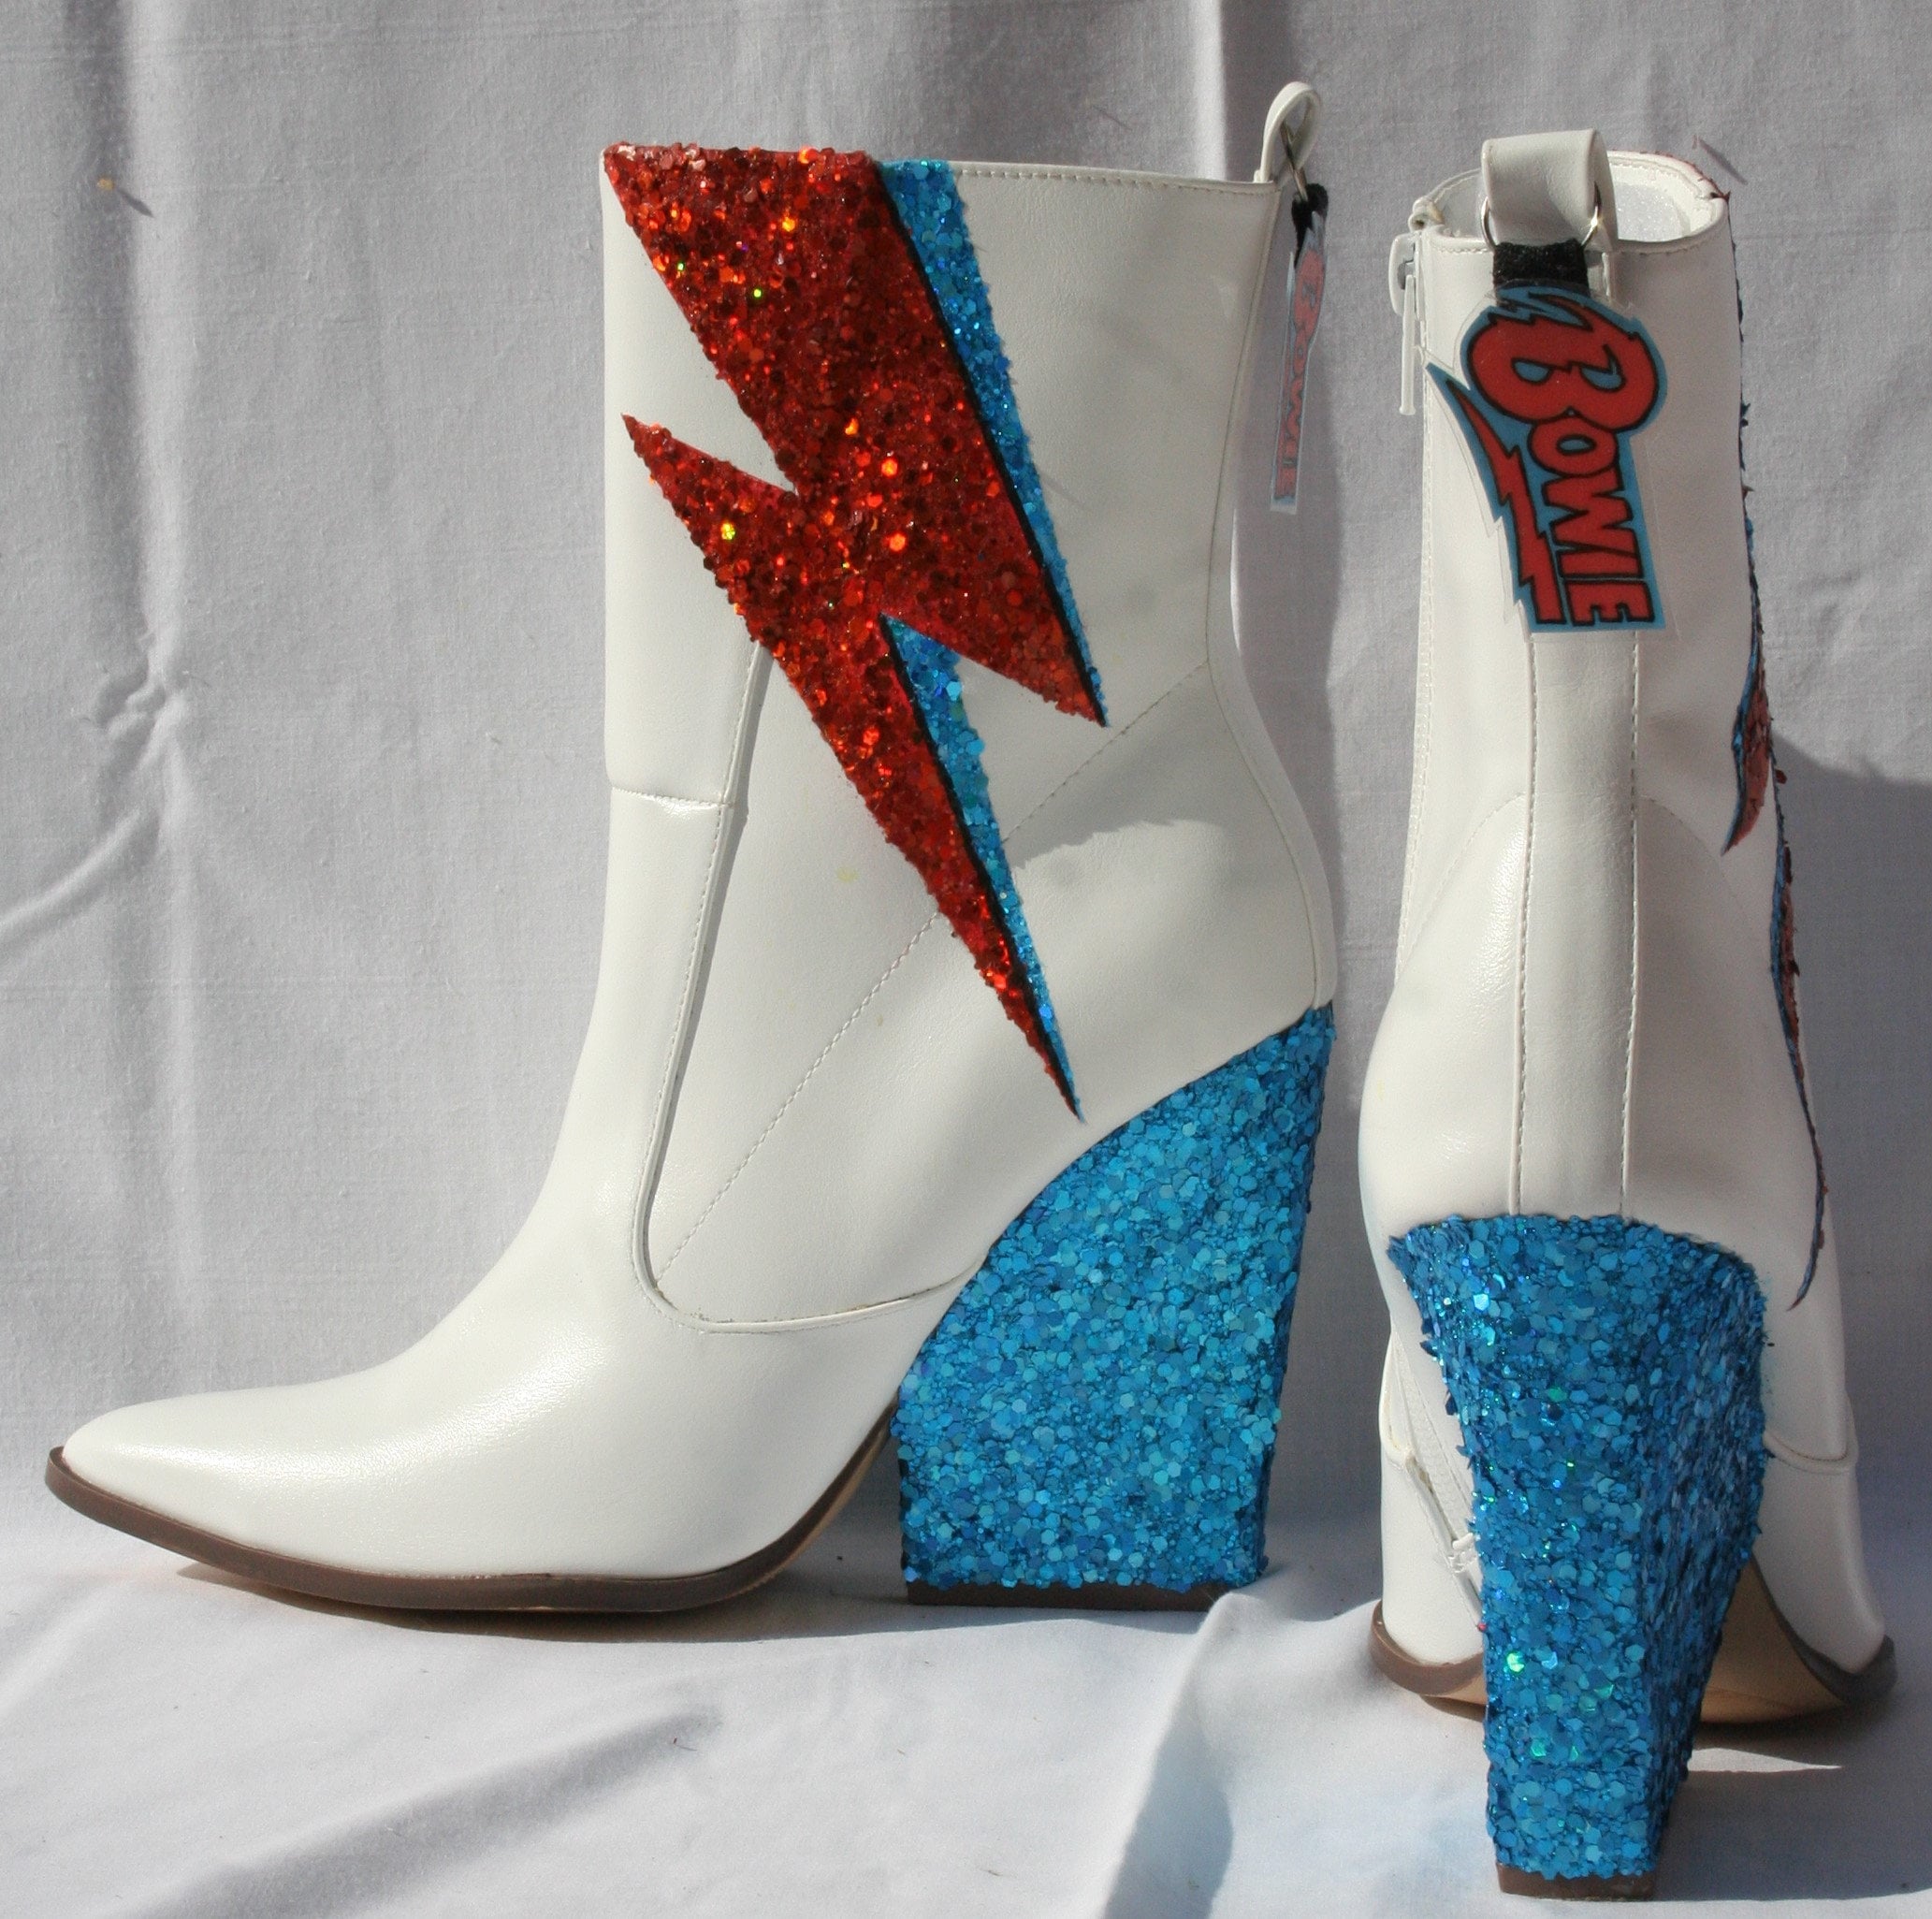 David Bowie Boots - Etsy